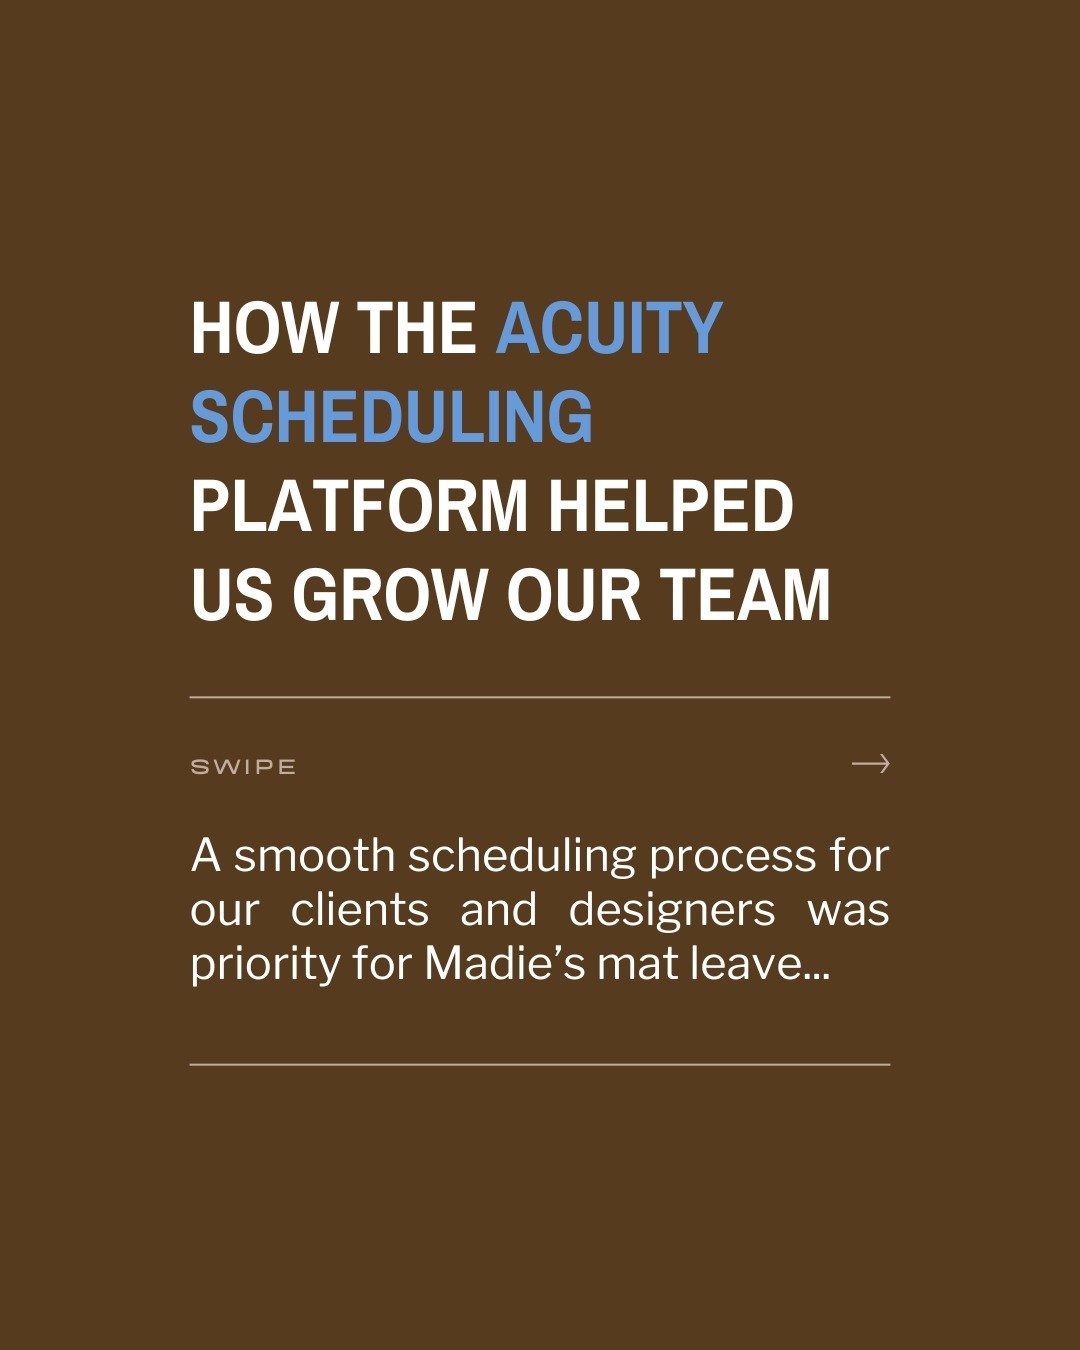 THIS piece of software has been one of the biggest difference makers in automating our team's booking process while Madie is away &rarr; Acuity Scheduling.

We're going to break down all of the ways this software is flexible and powerful for growing 